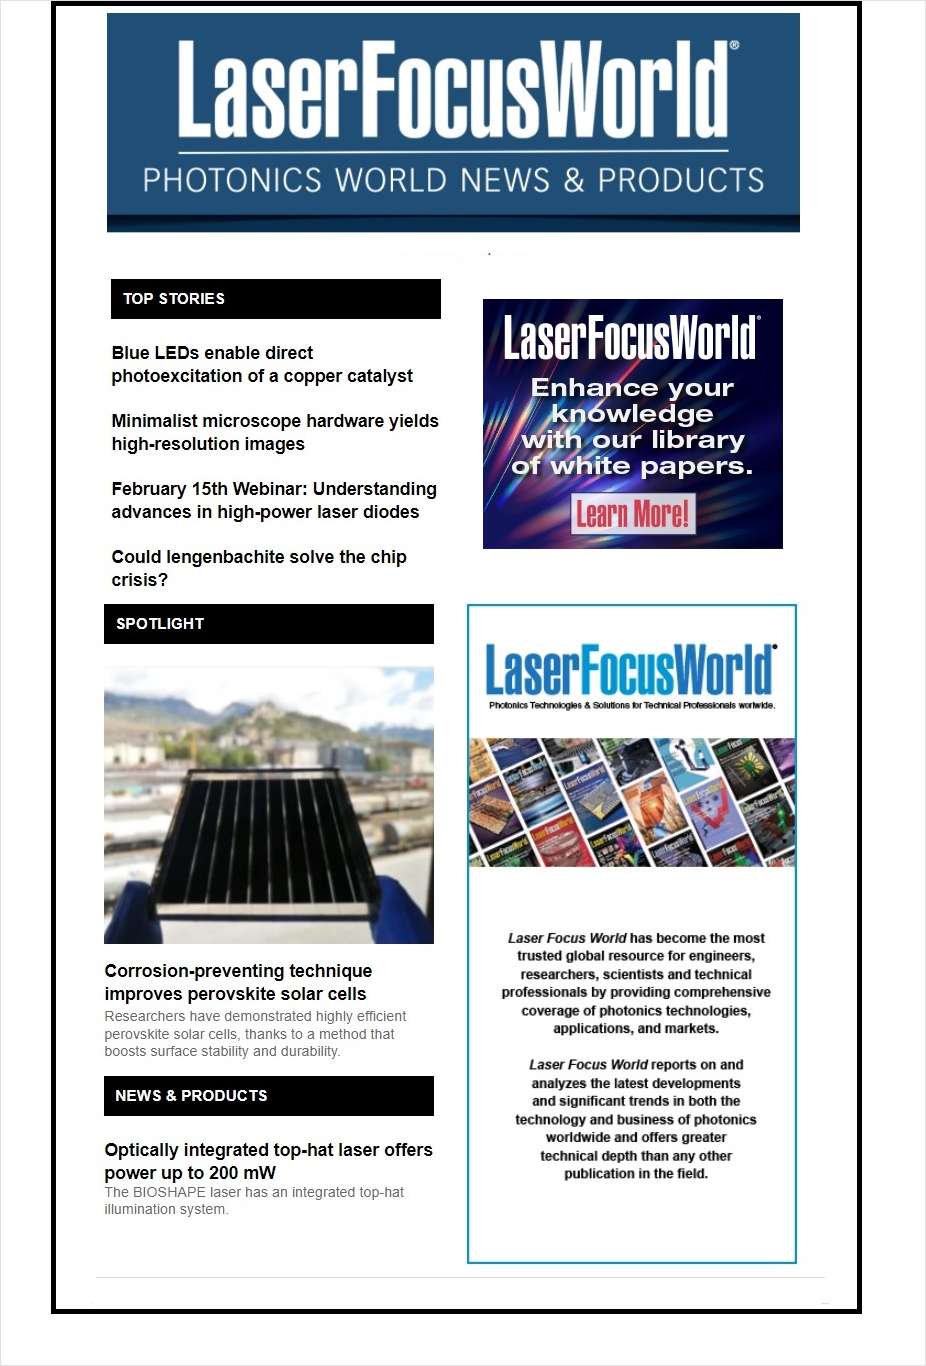 LFW's Photonics News & Products: Global Report newsletter